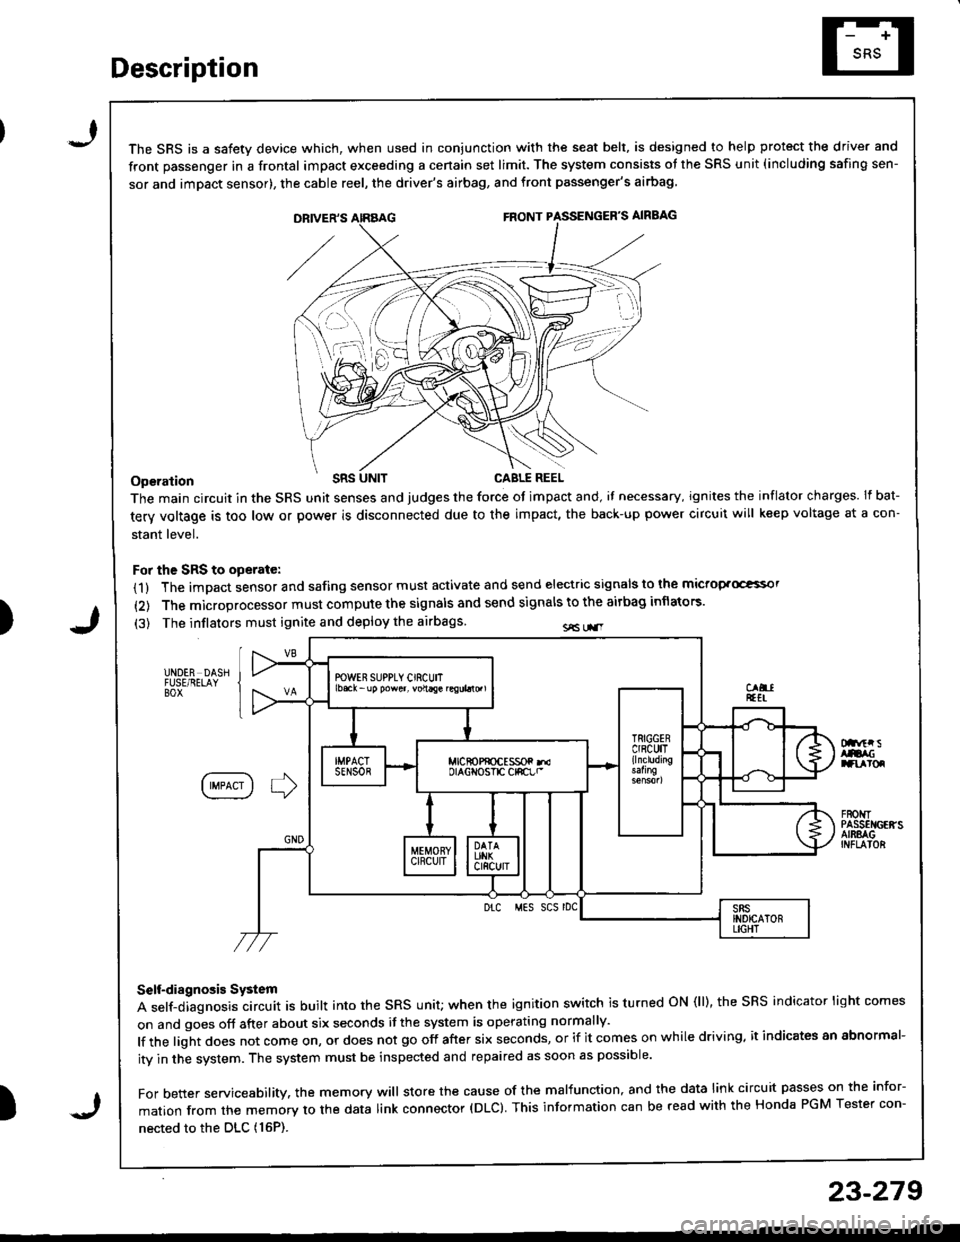 HONDA INTEGRA 1998 4.G Workshop Manual Description
I
J)
)
\ \, ili \.-.-1 i^\\,,; i \
The SRS is a safetv device which, when used in coniunction with the seat belt, is designed to help protect the driver and
front passenger in a frontal